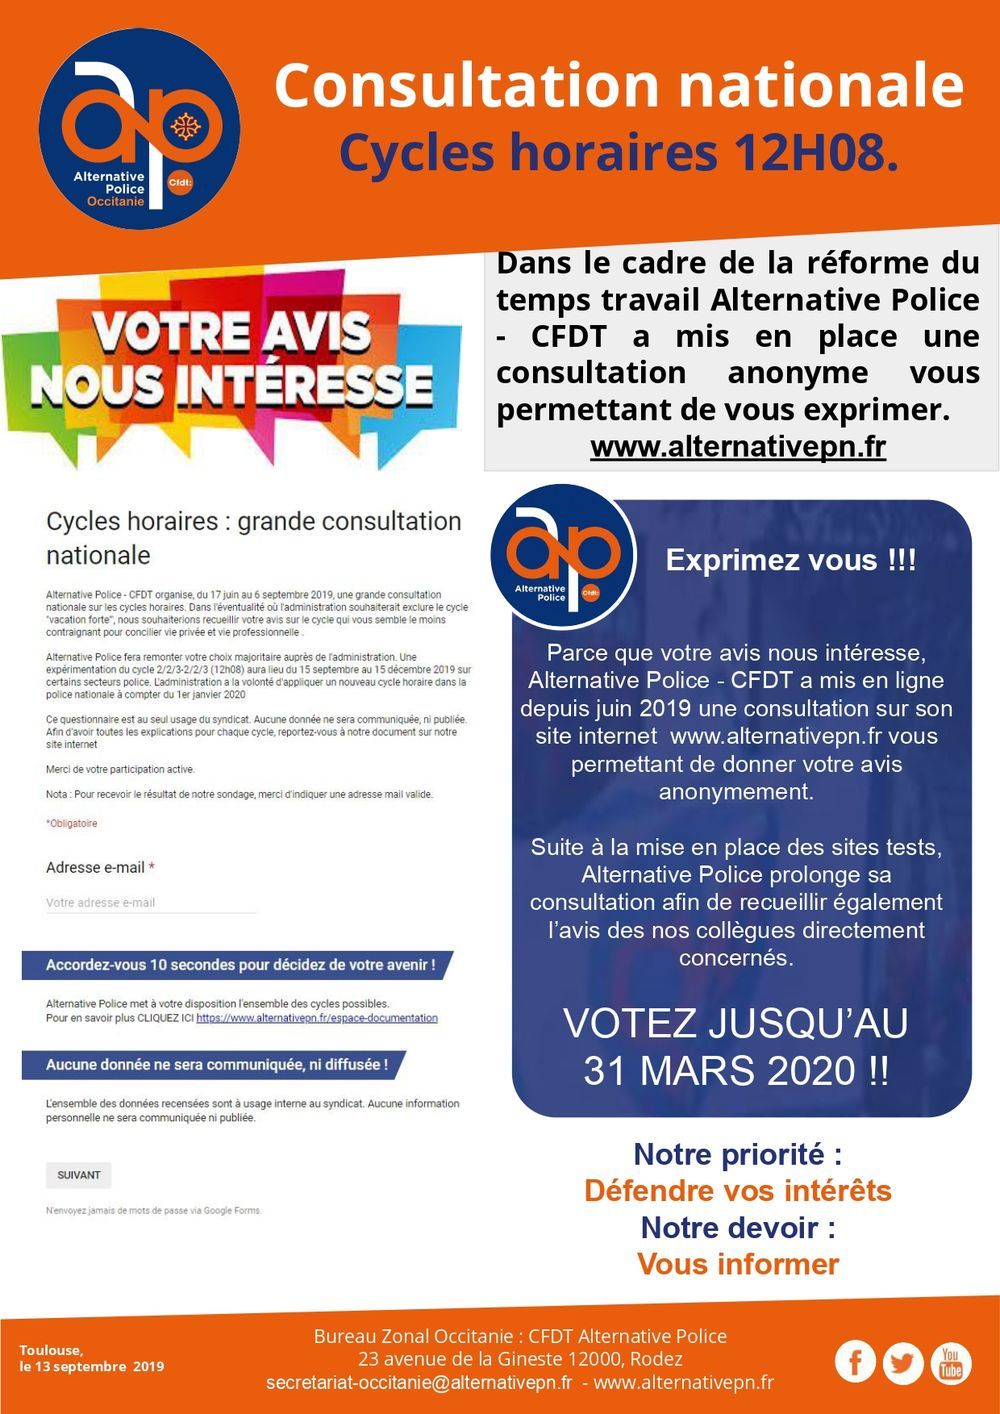 Consultation nationale : Cycles horaires 12H08